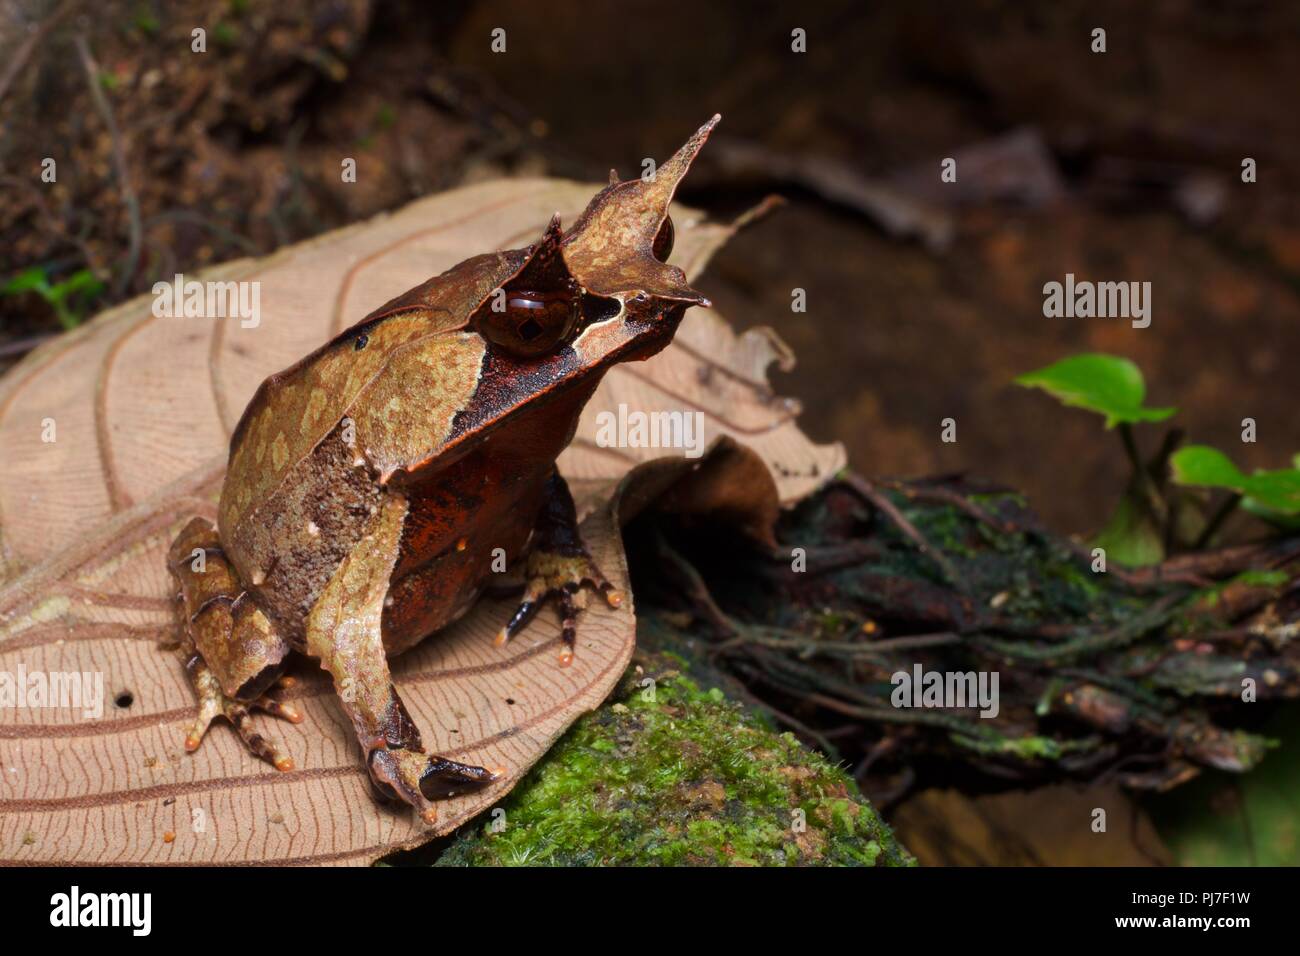 A Malayan Horned Frog (Megophrys nasuta) on the forest floor at night in Gunung Gading National Park, Sarawak, East Malaysia, Borneo Stock Photo